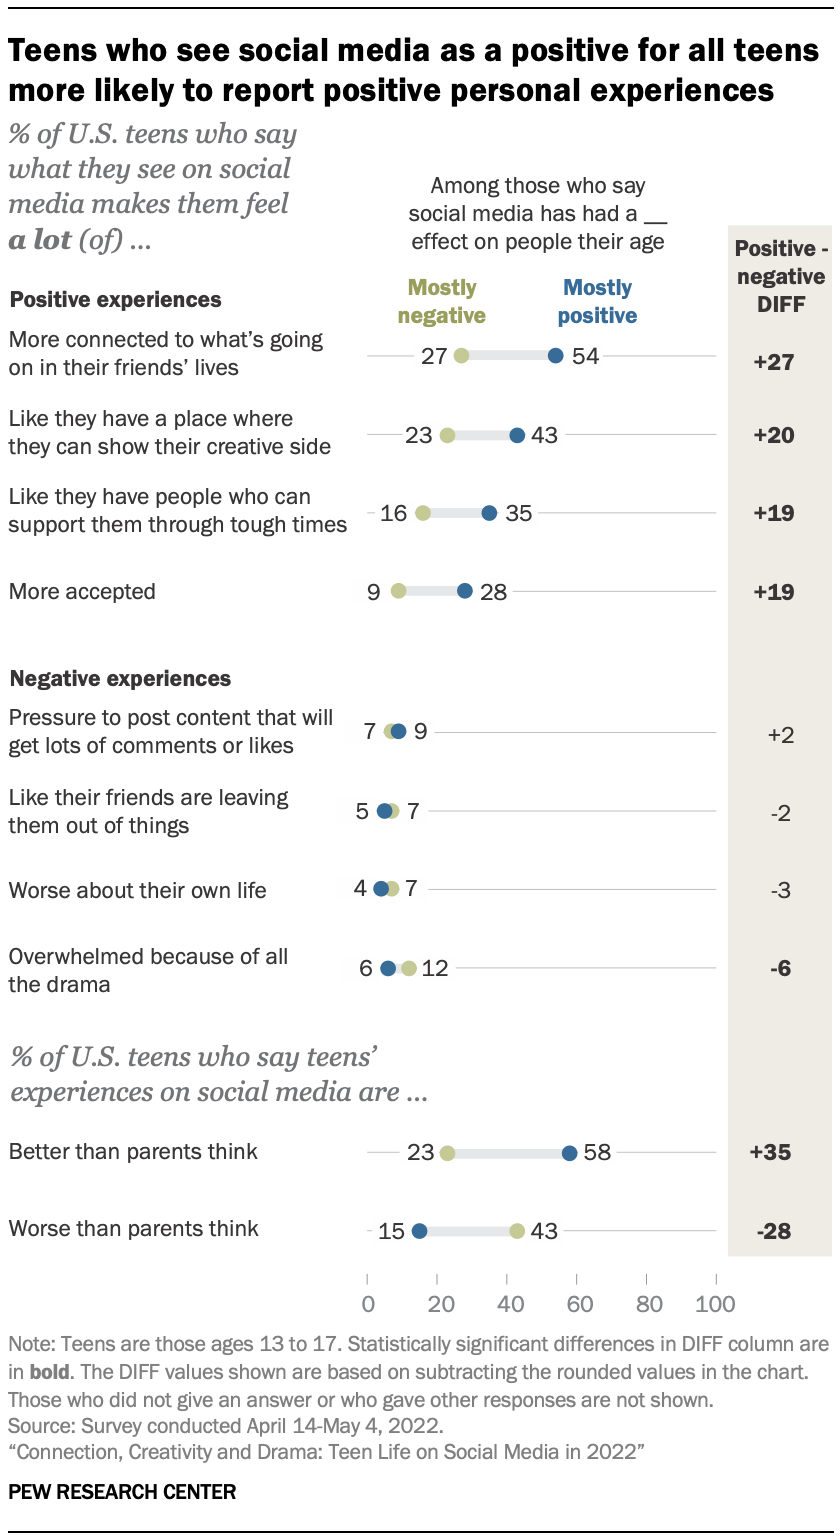 Teens who see social media as a positive for all teens more likely to report positive personal experiences 